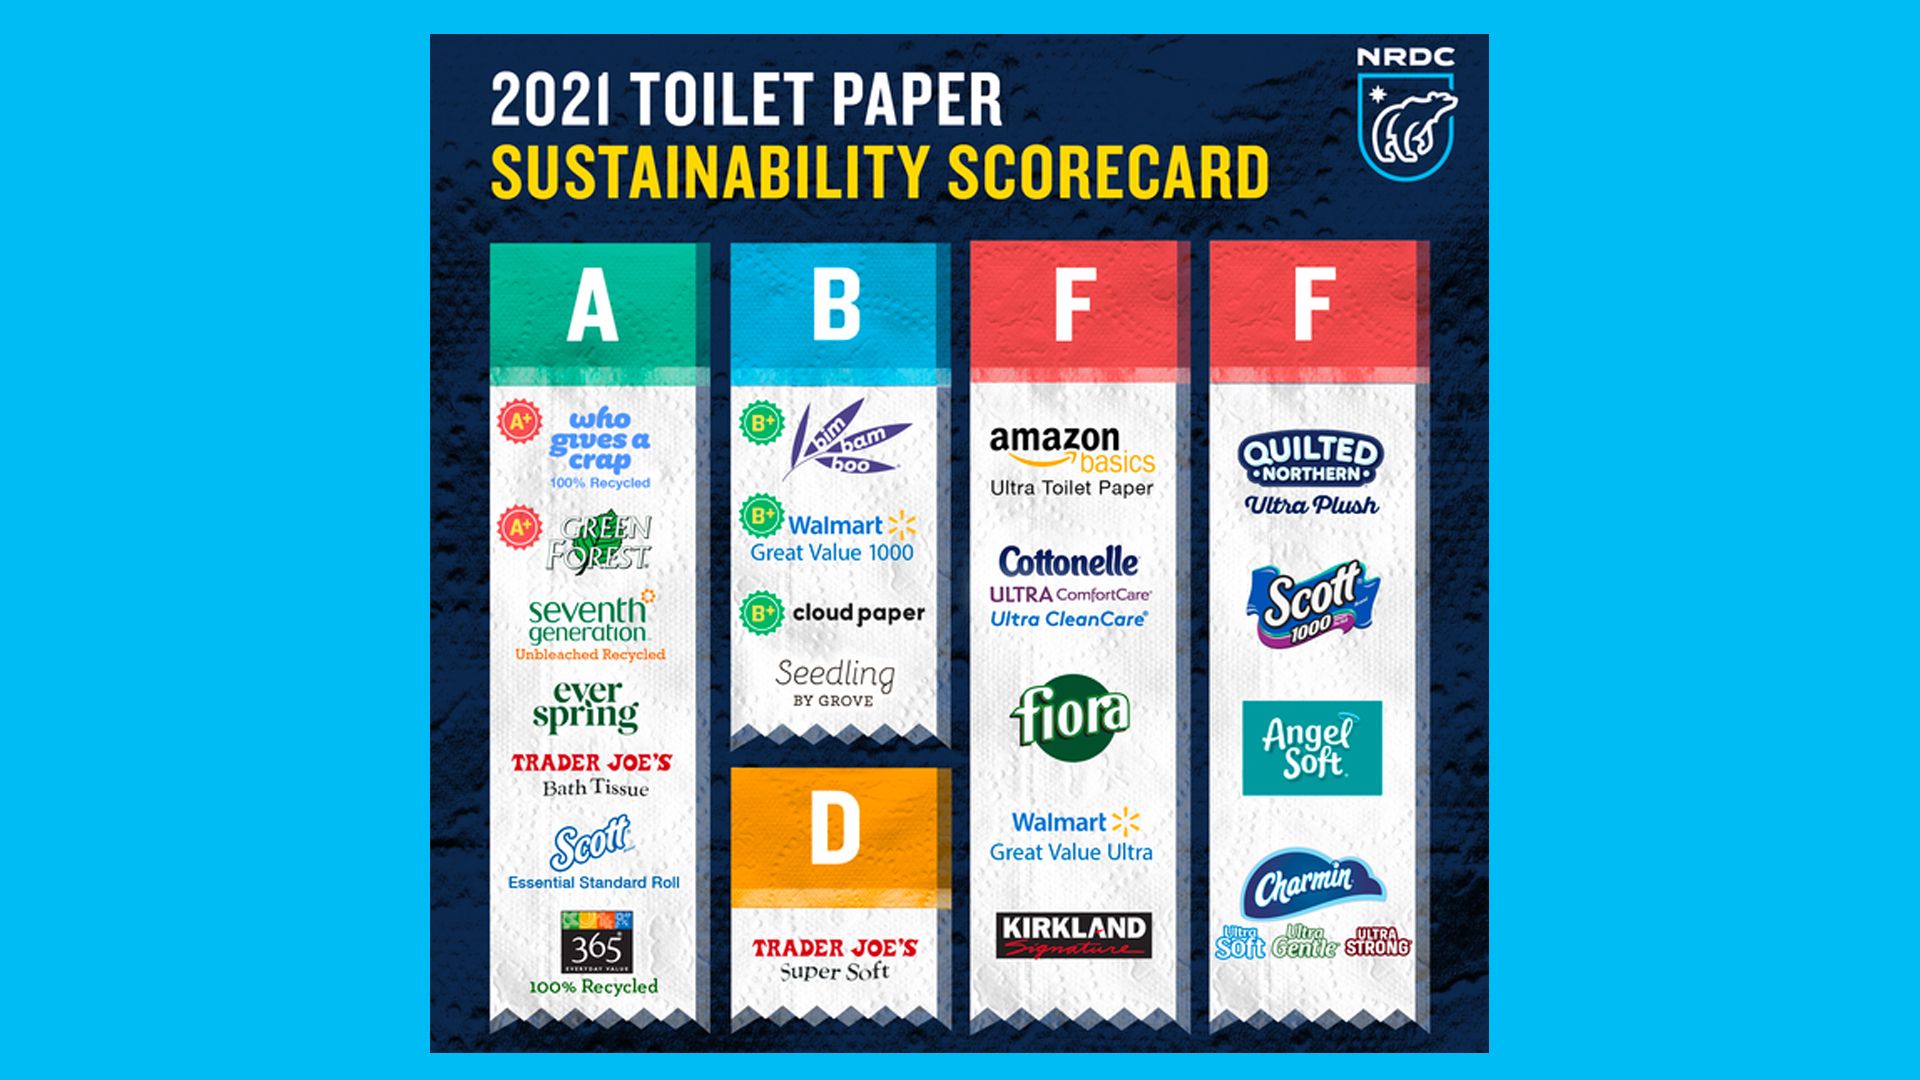 Rating scorecard of the sustainability of different toilet paper brands